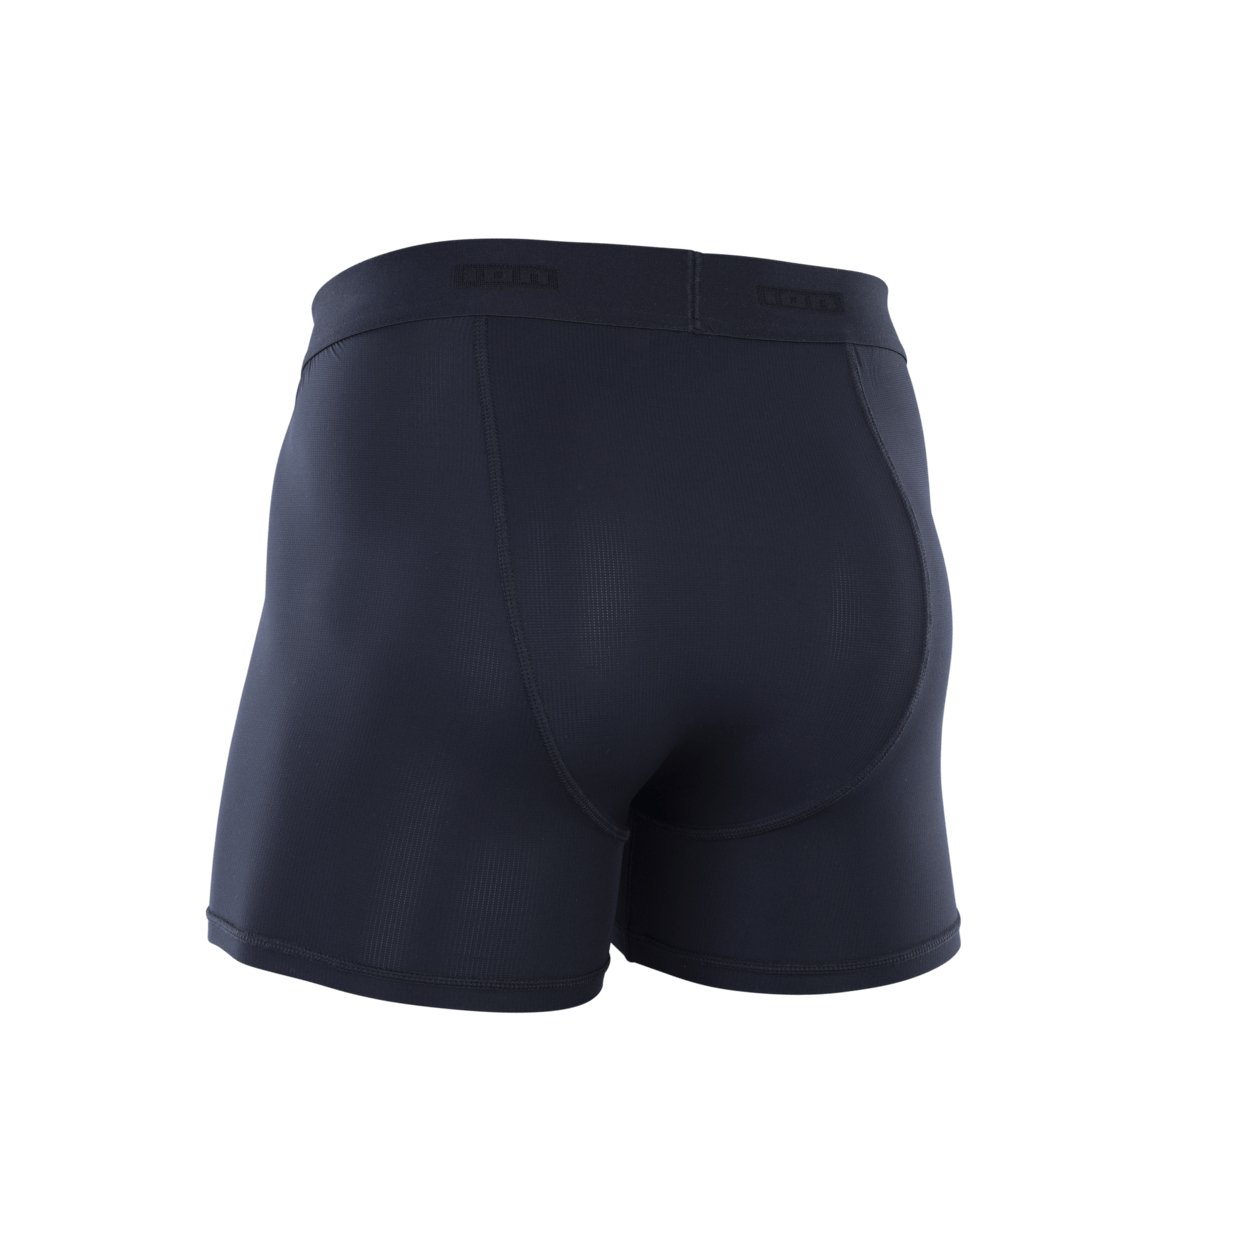 ION Bottom Base Shorts men 2024 - Worthing Watersports - 9010583177441 - Tops - ION Water